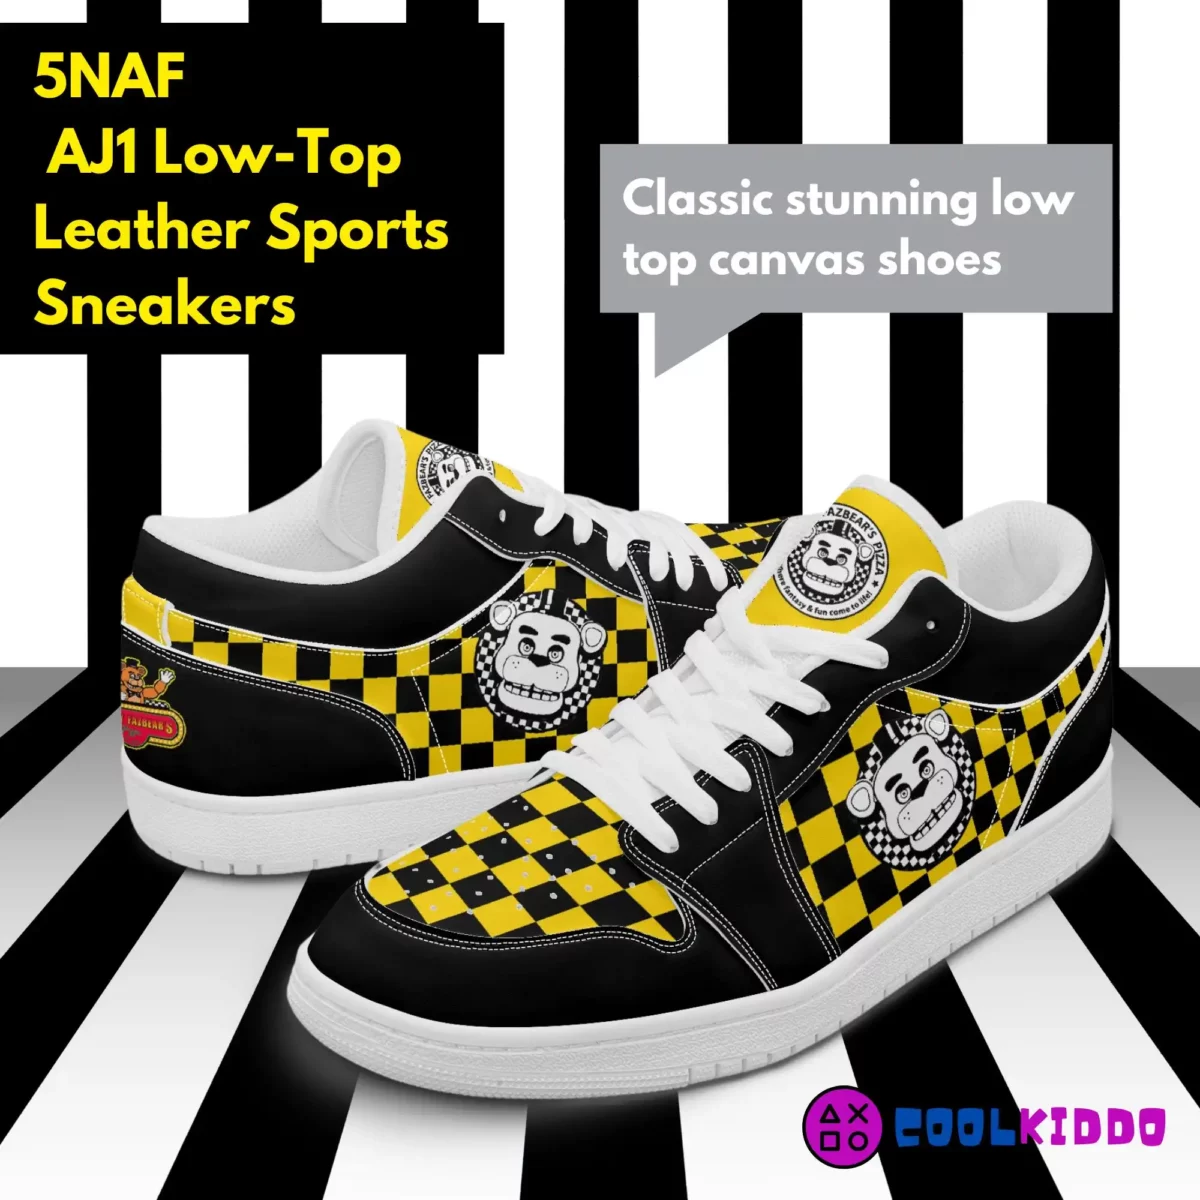 FNAF Five Nights at Freddy’s Video Game Shoes Inspired Low-Top Leather Sneakers for youth / adults Cool Kiddo 10